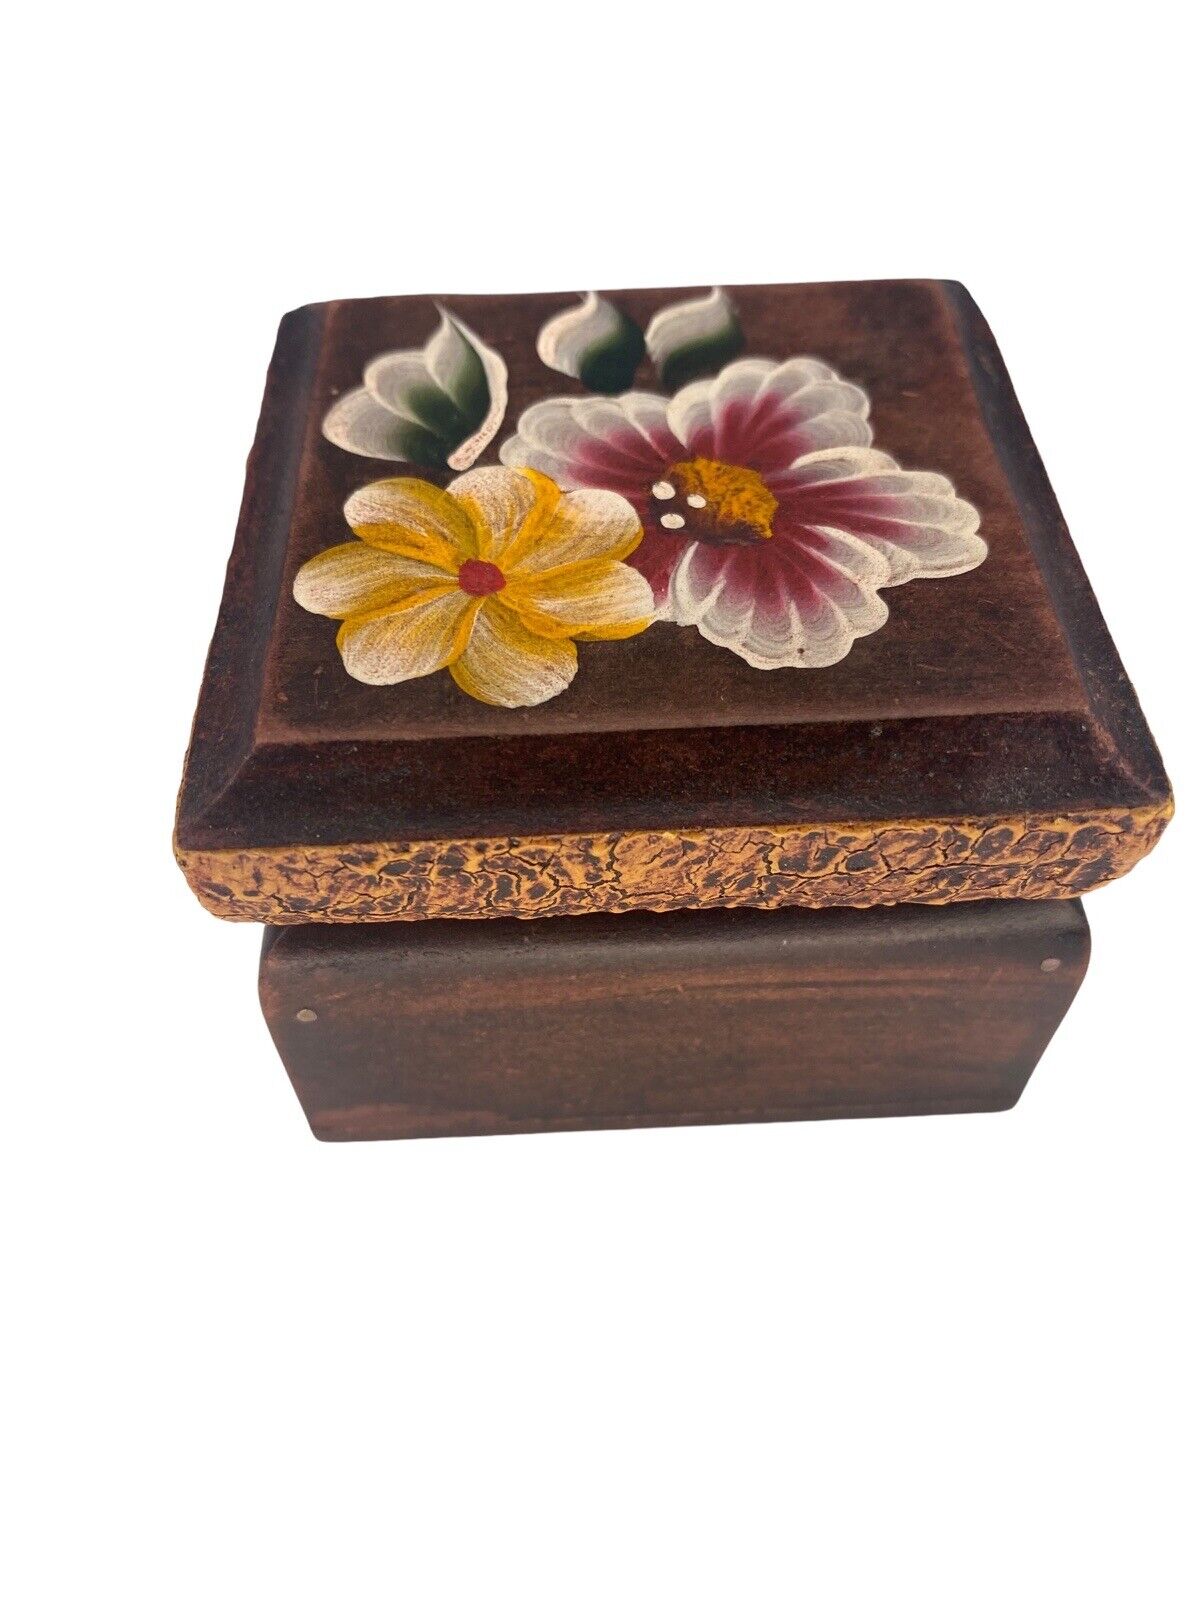 Floral Hand Painted Wood  Trinket Jewelry Gift Box\\Square Boho Artisan